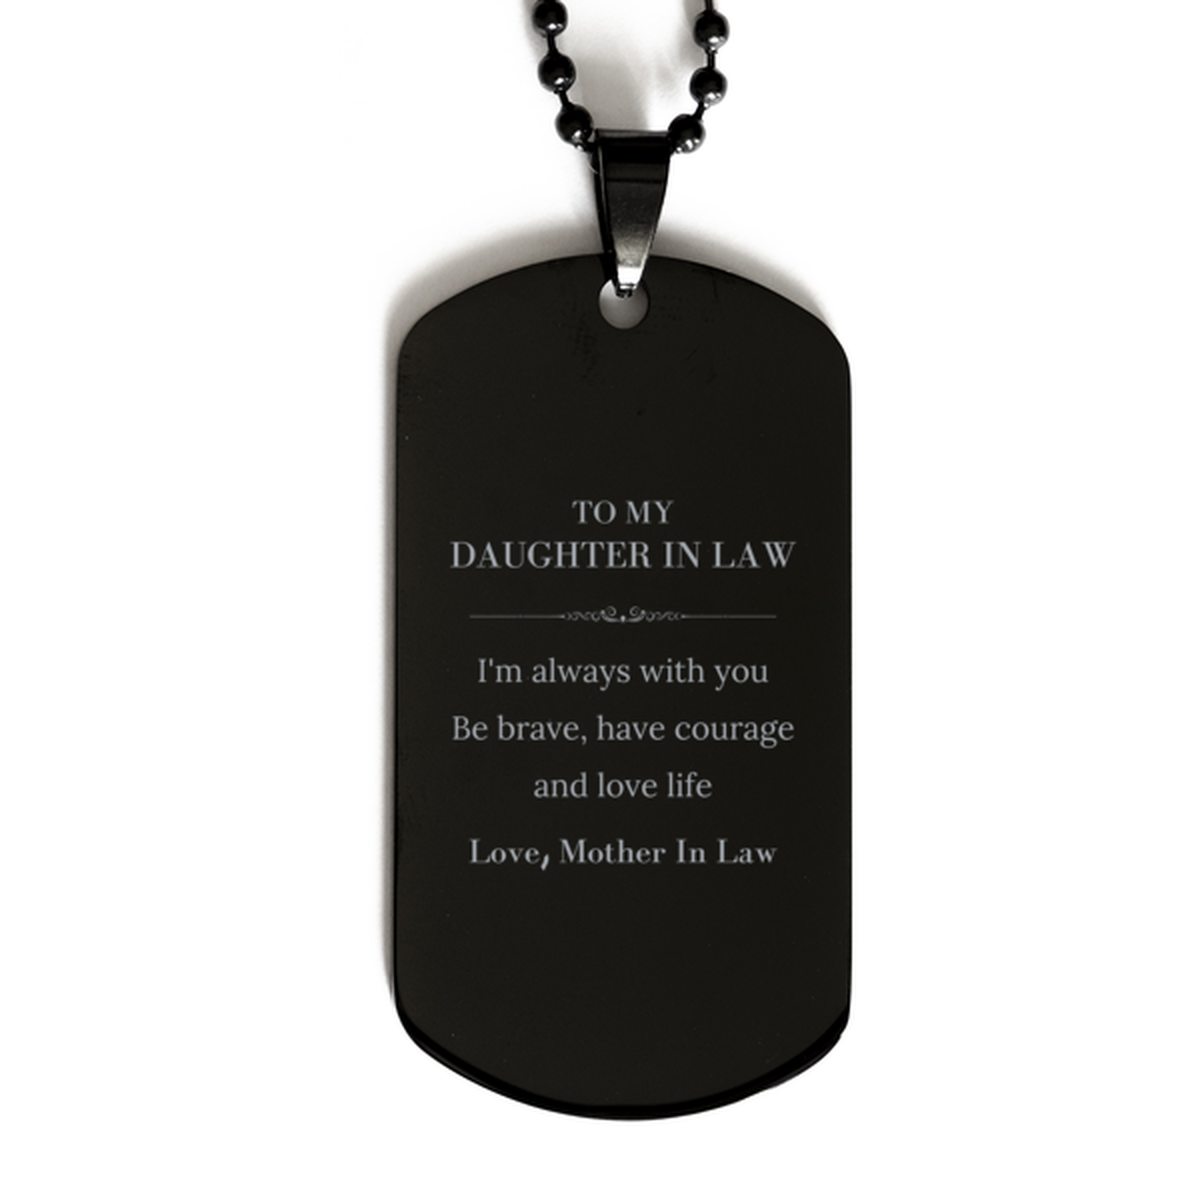 To My Daughter In Law Gifts from Mother In Law, Unique Black Dog Tag Inspirational Christmas Birthday Graduation Gifts for Daughter In Law I'm always with you. Be brave, have courage and love life. Love, Mother In Law